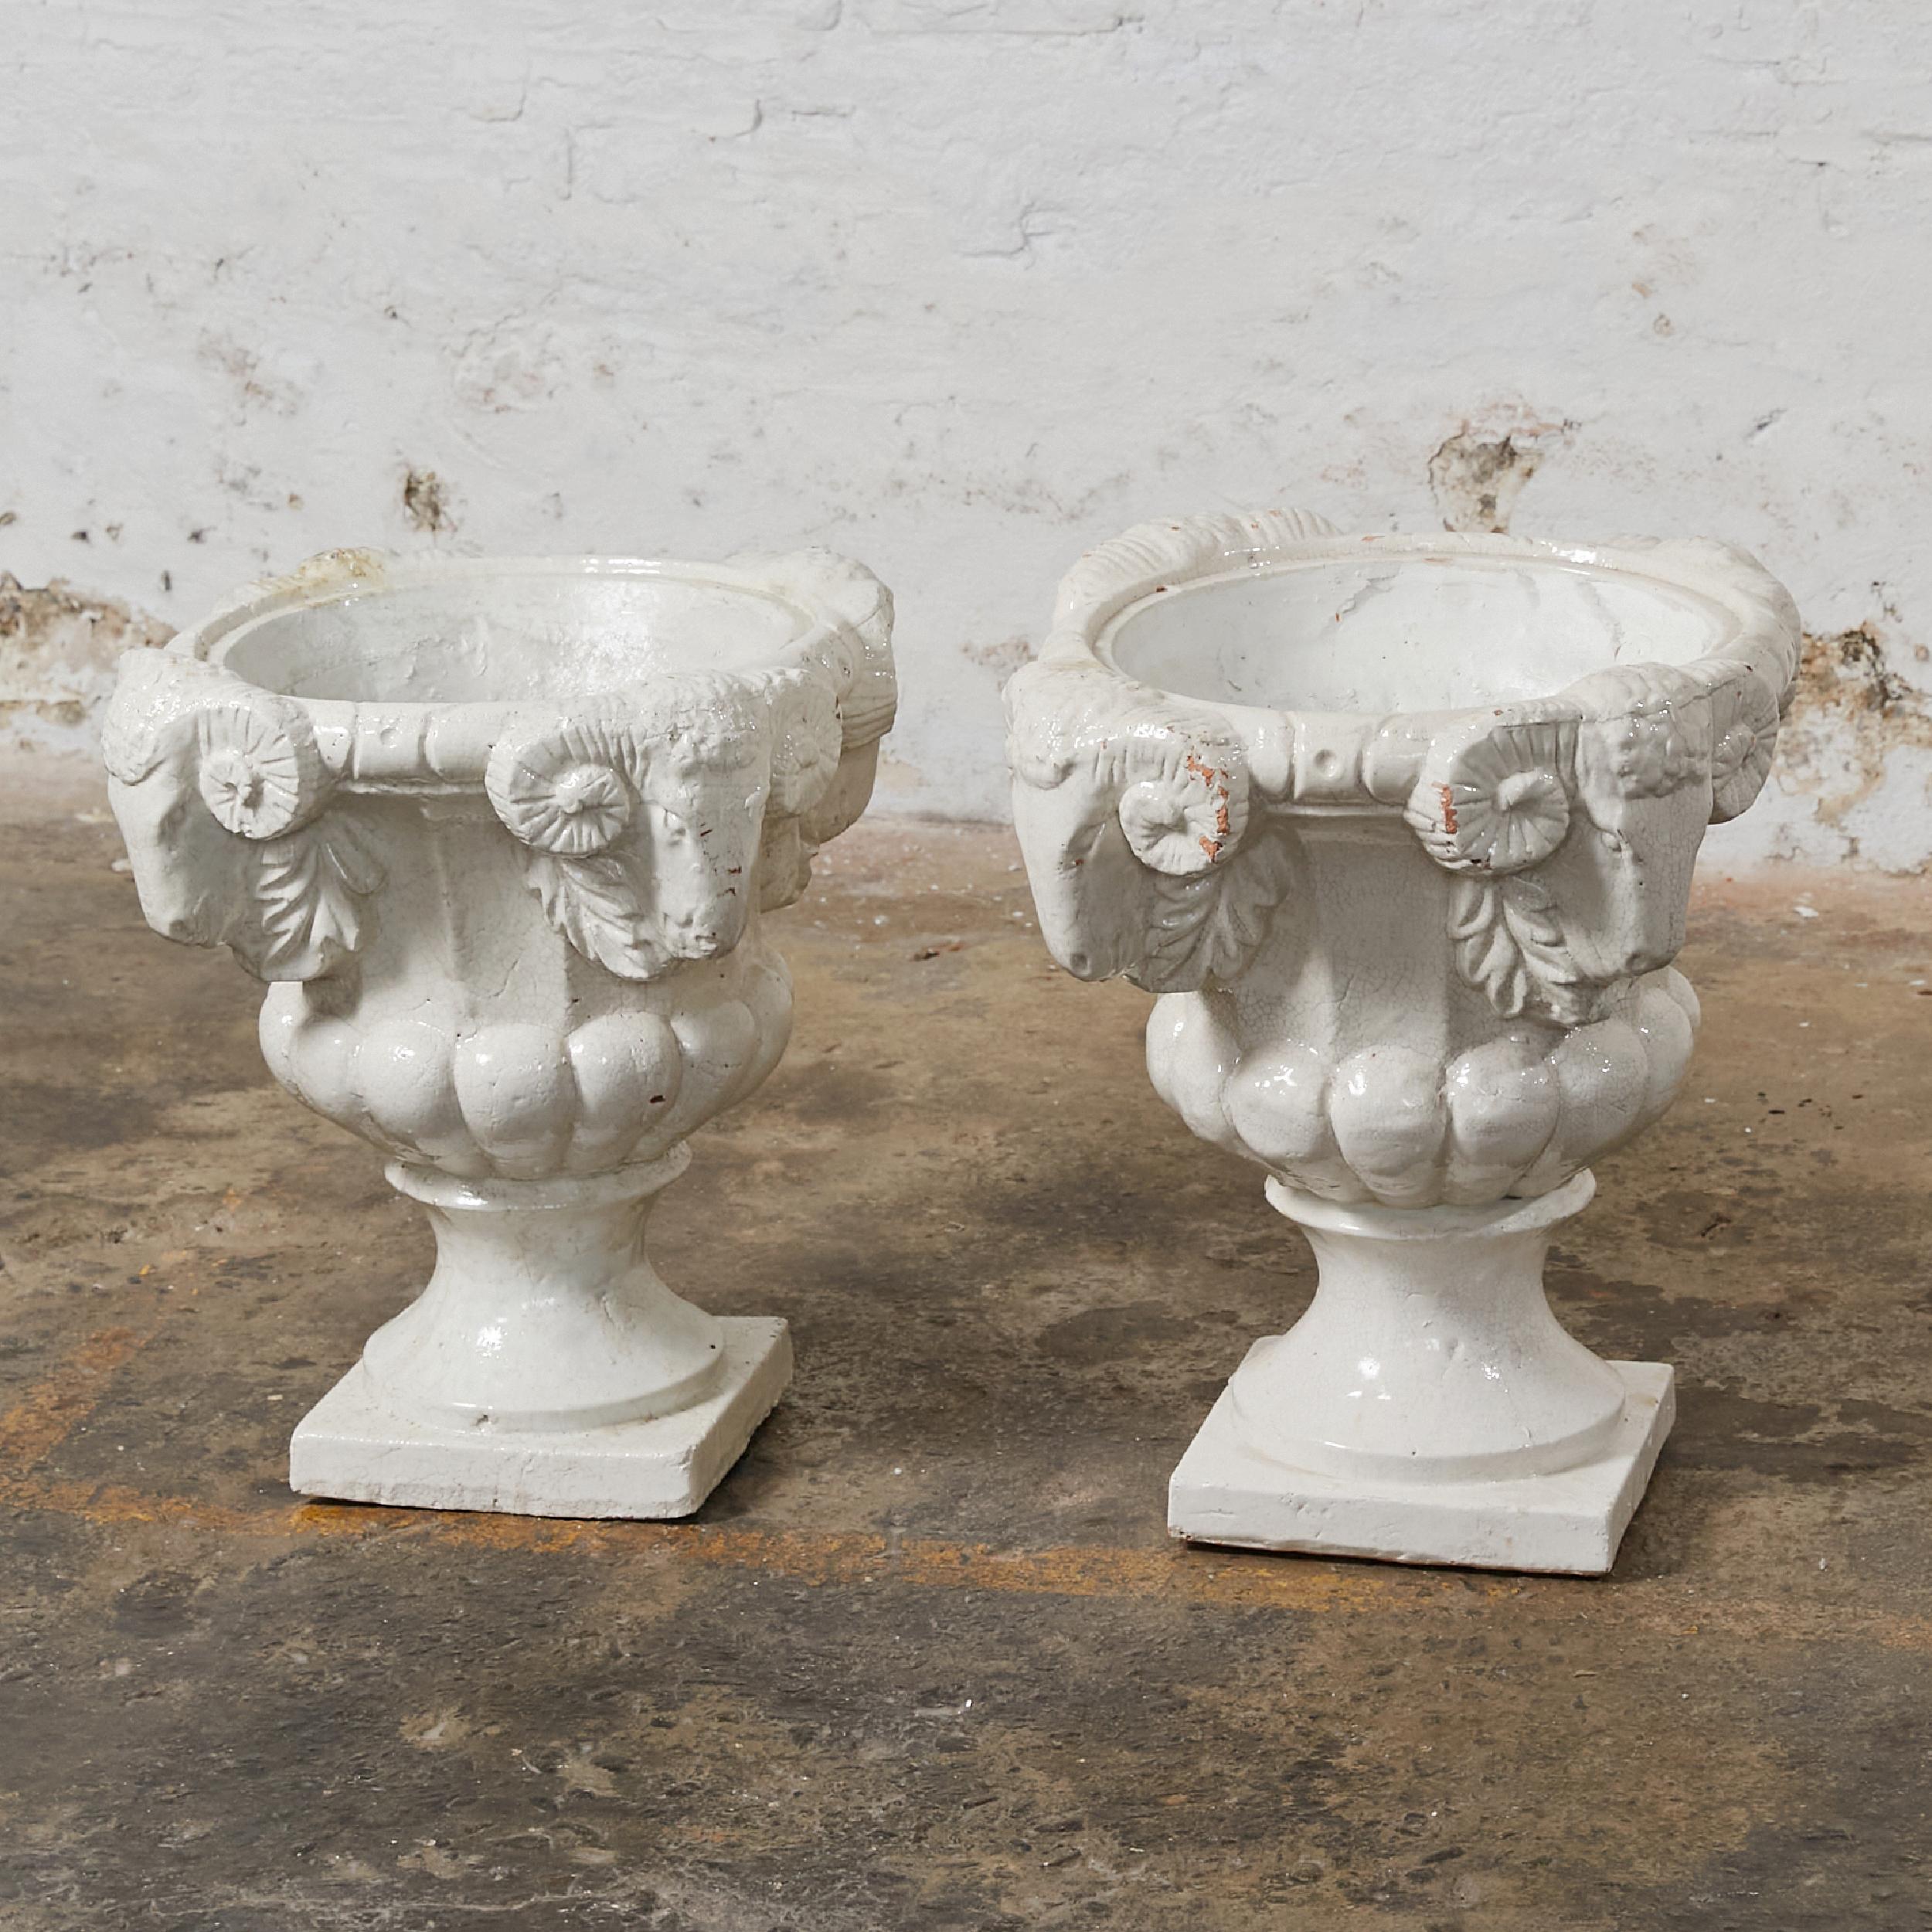 French Provincial Set of Two Dutch Terracota Planters with White Crackled Glaze